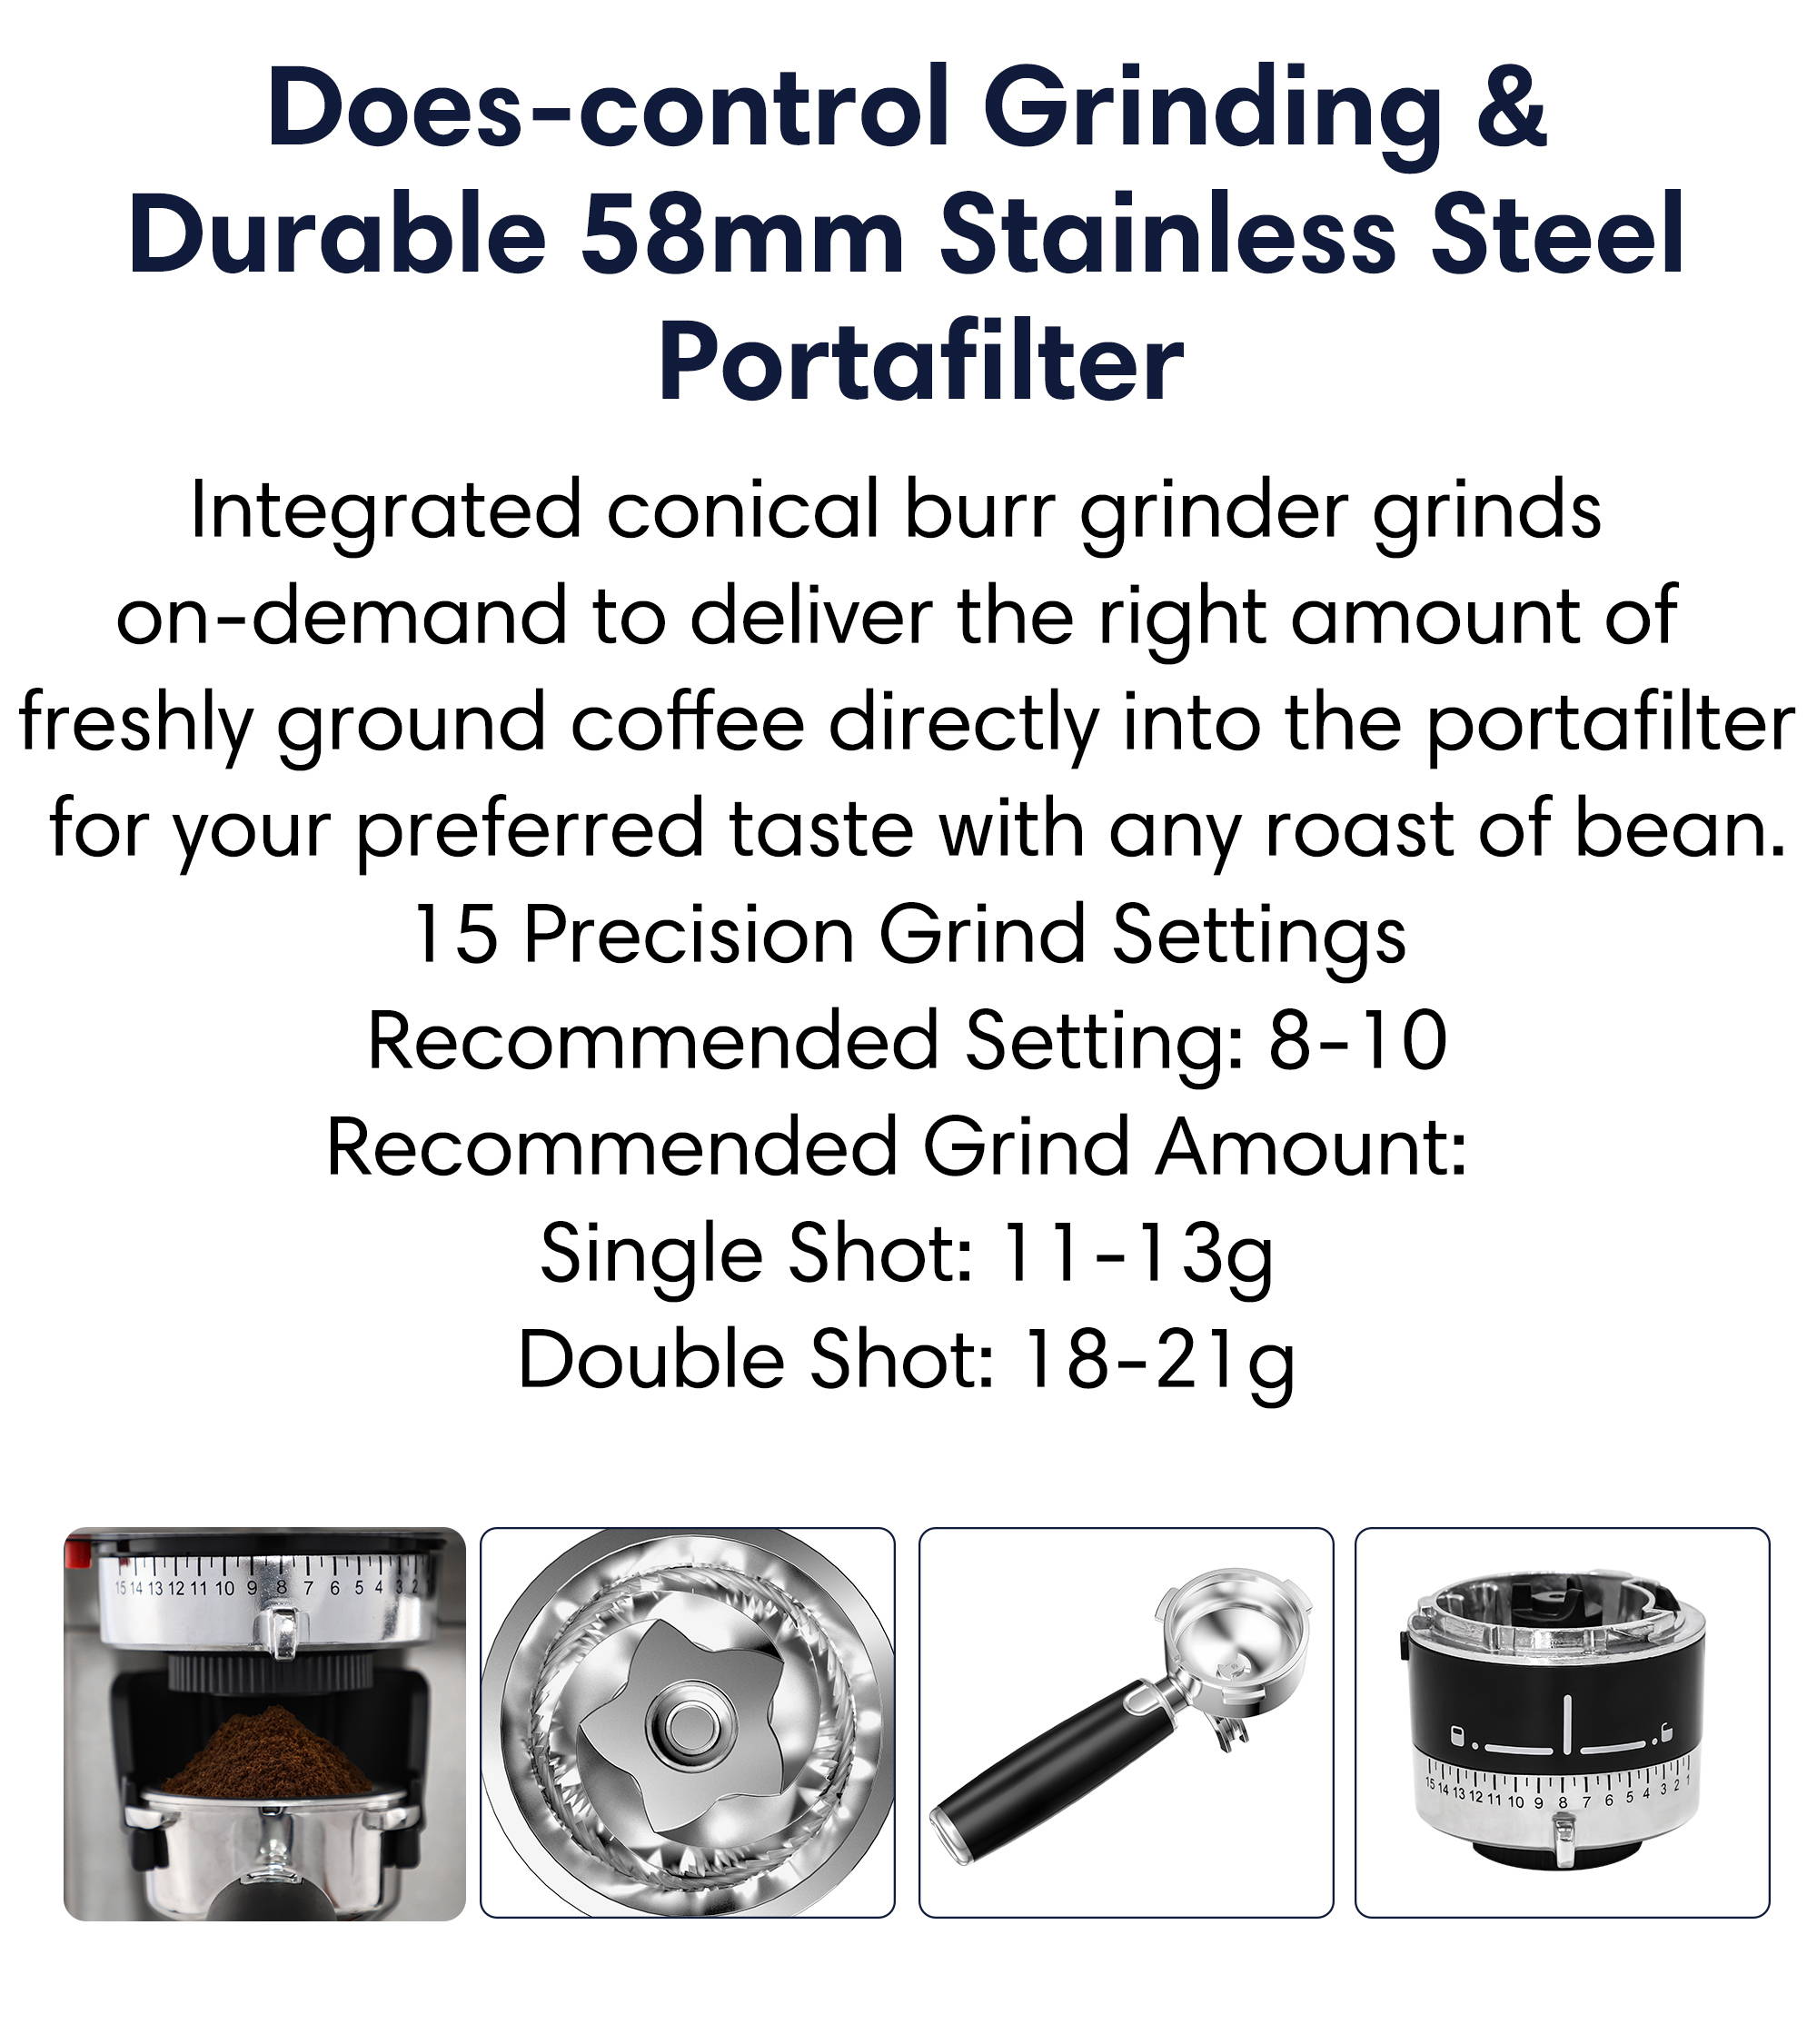 Does-control grinding and surable 58mm stainless steel portafilter  integrated conical burr grinder grinds on-demand to deliver the right amount of freshly ground coffee directly into the portafilter for your preferred taste with any roast of bean.